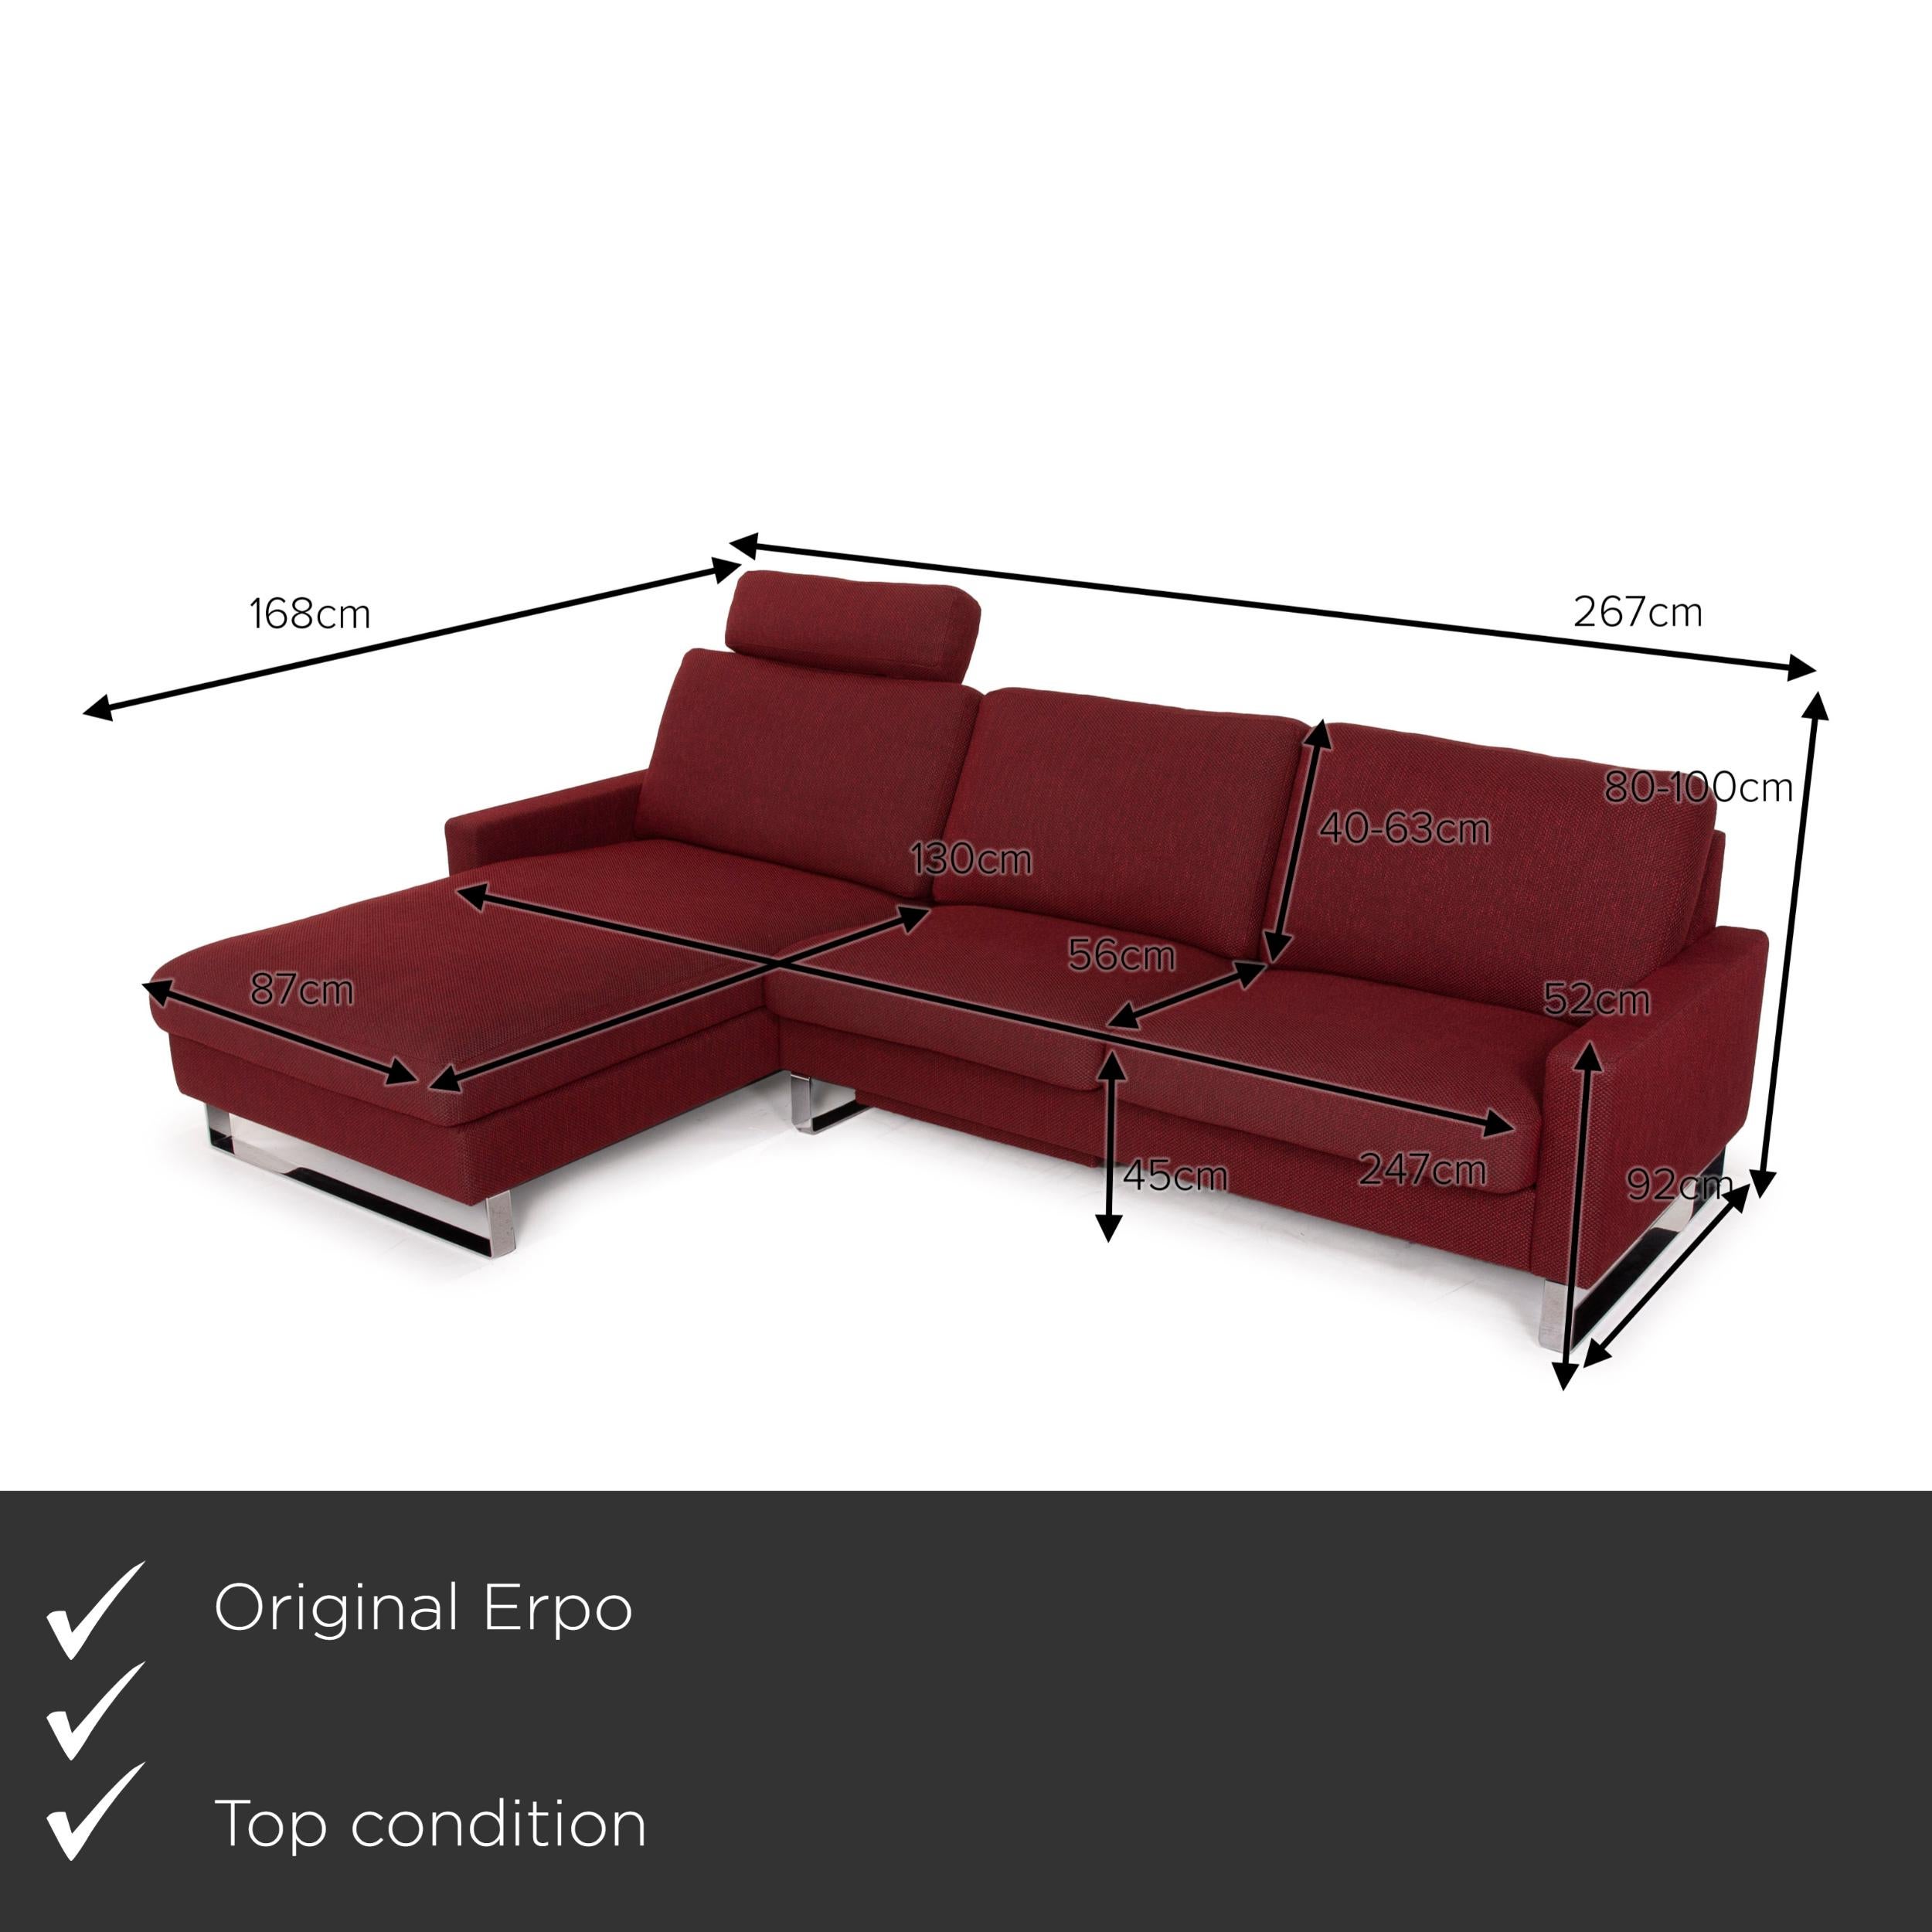 We present to you an Erpo CL 500 fabric sofa red corner sofa.
 

 Product measurements in centimeters:
 

Depth: 168
Width: 168
Height: 80
Seat height: 45
Rest height: 52
Seat depth: 130
Seat width: 243
Back height: 40.
 